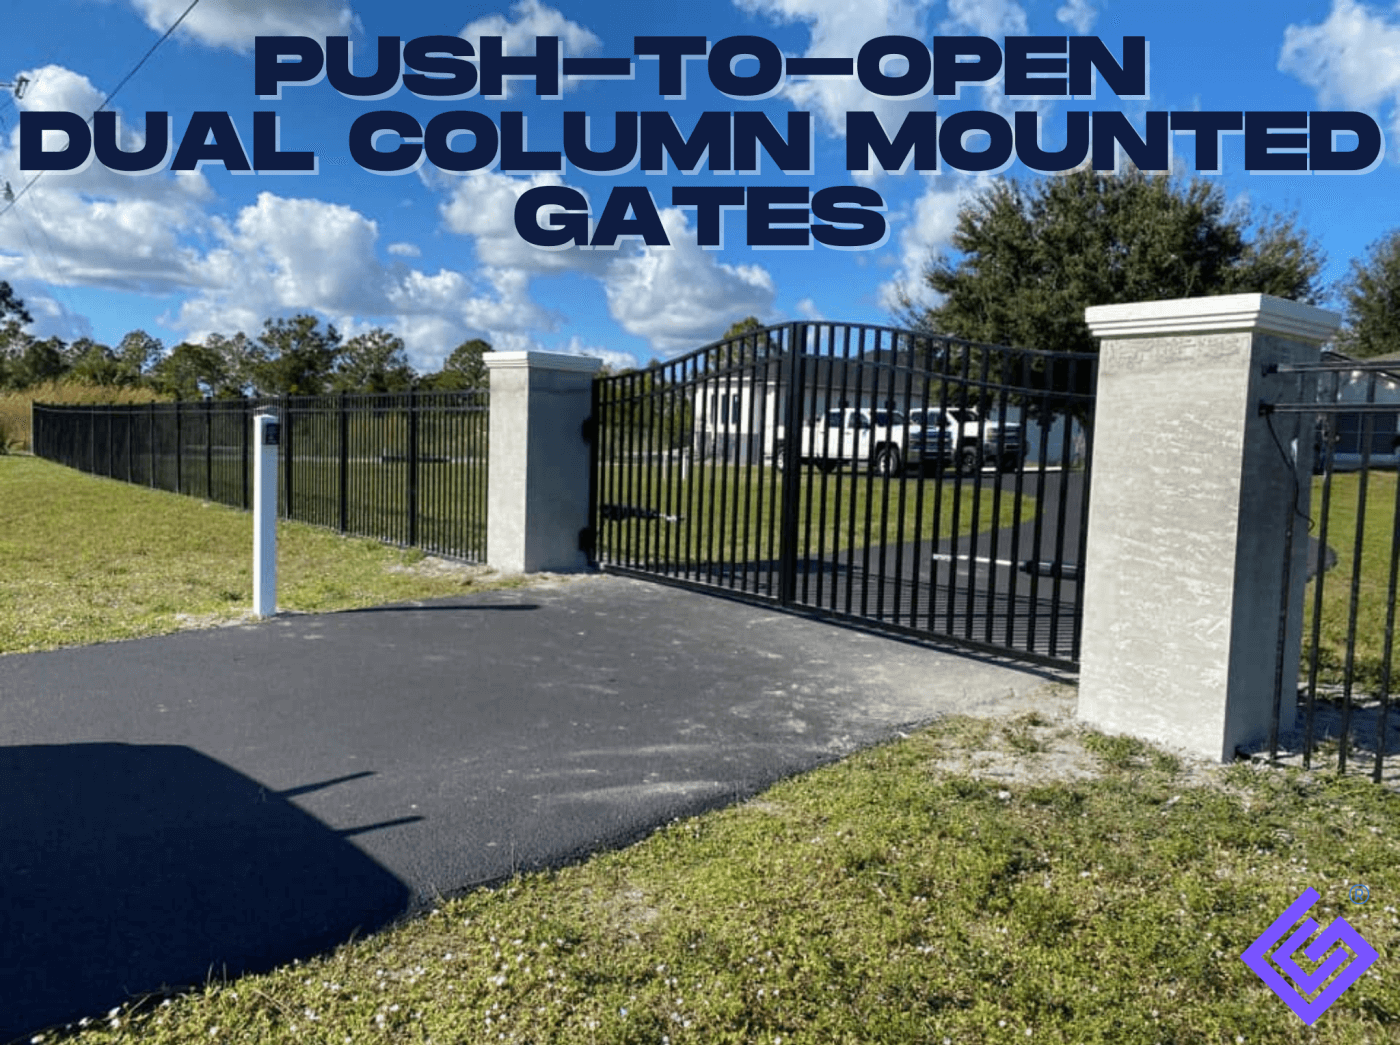 Automatic Gate Opener Push To Open Dual Column Mounted Gates